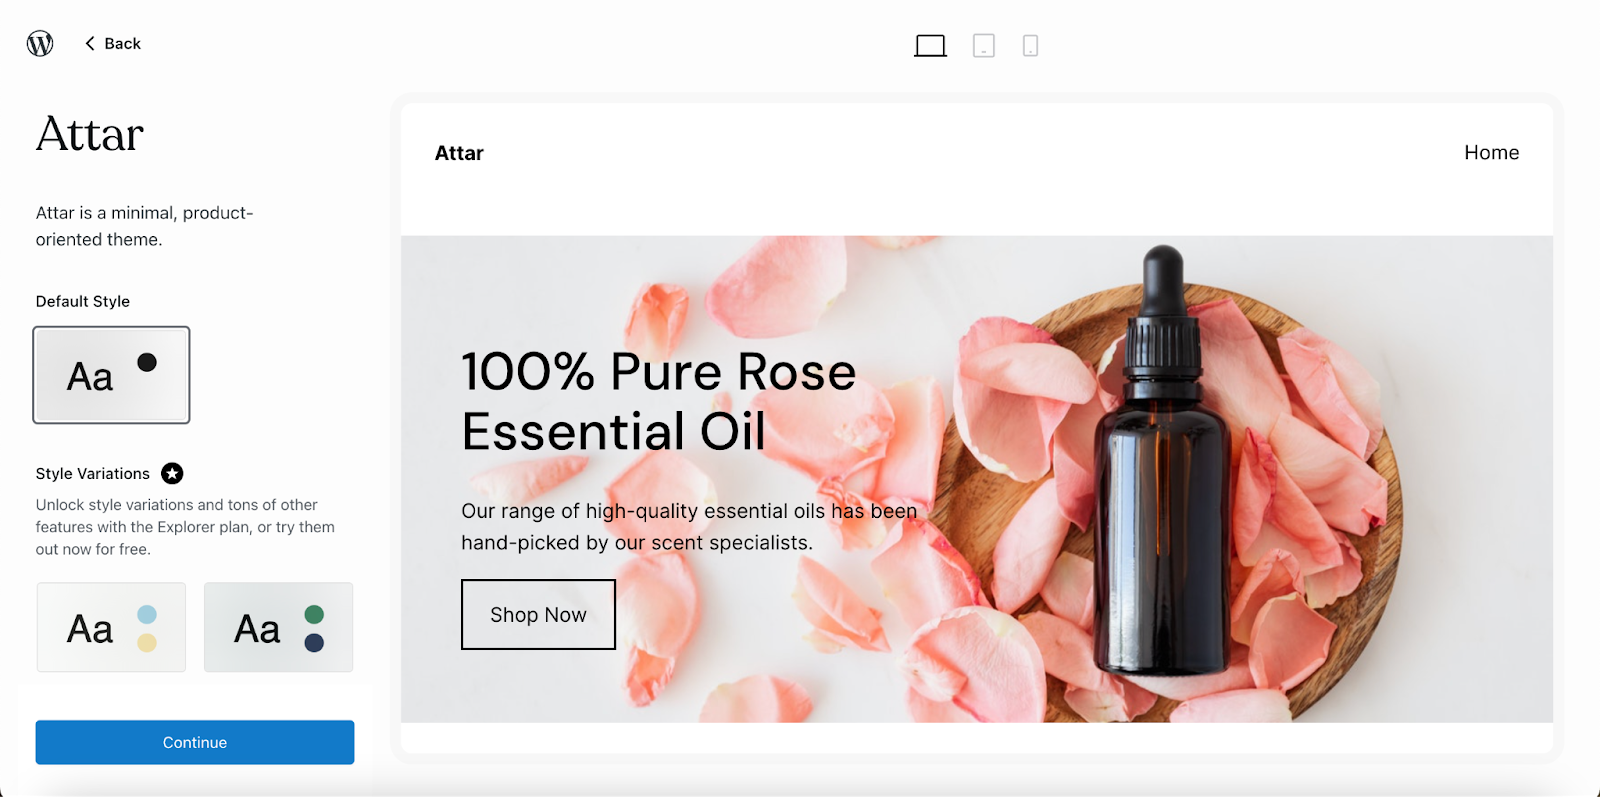 How to make an ecommerce website with WordPress: The Attar WordPress theme is a simple yet functional website theme for an online shop.